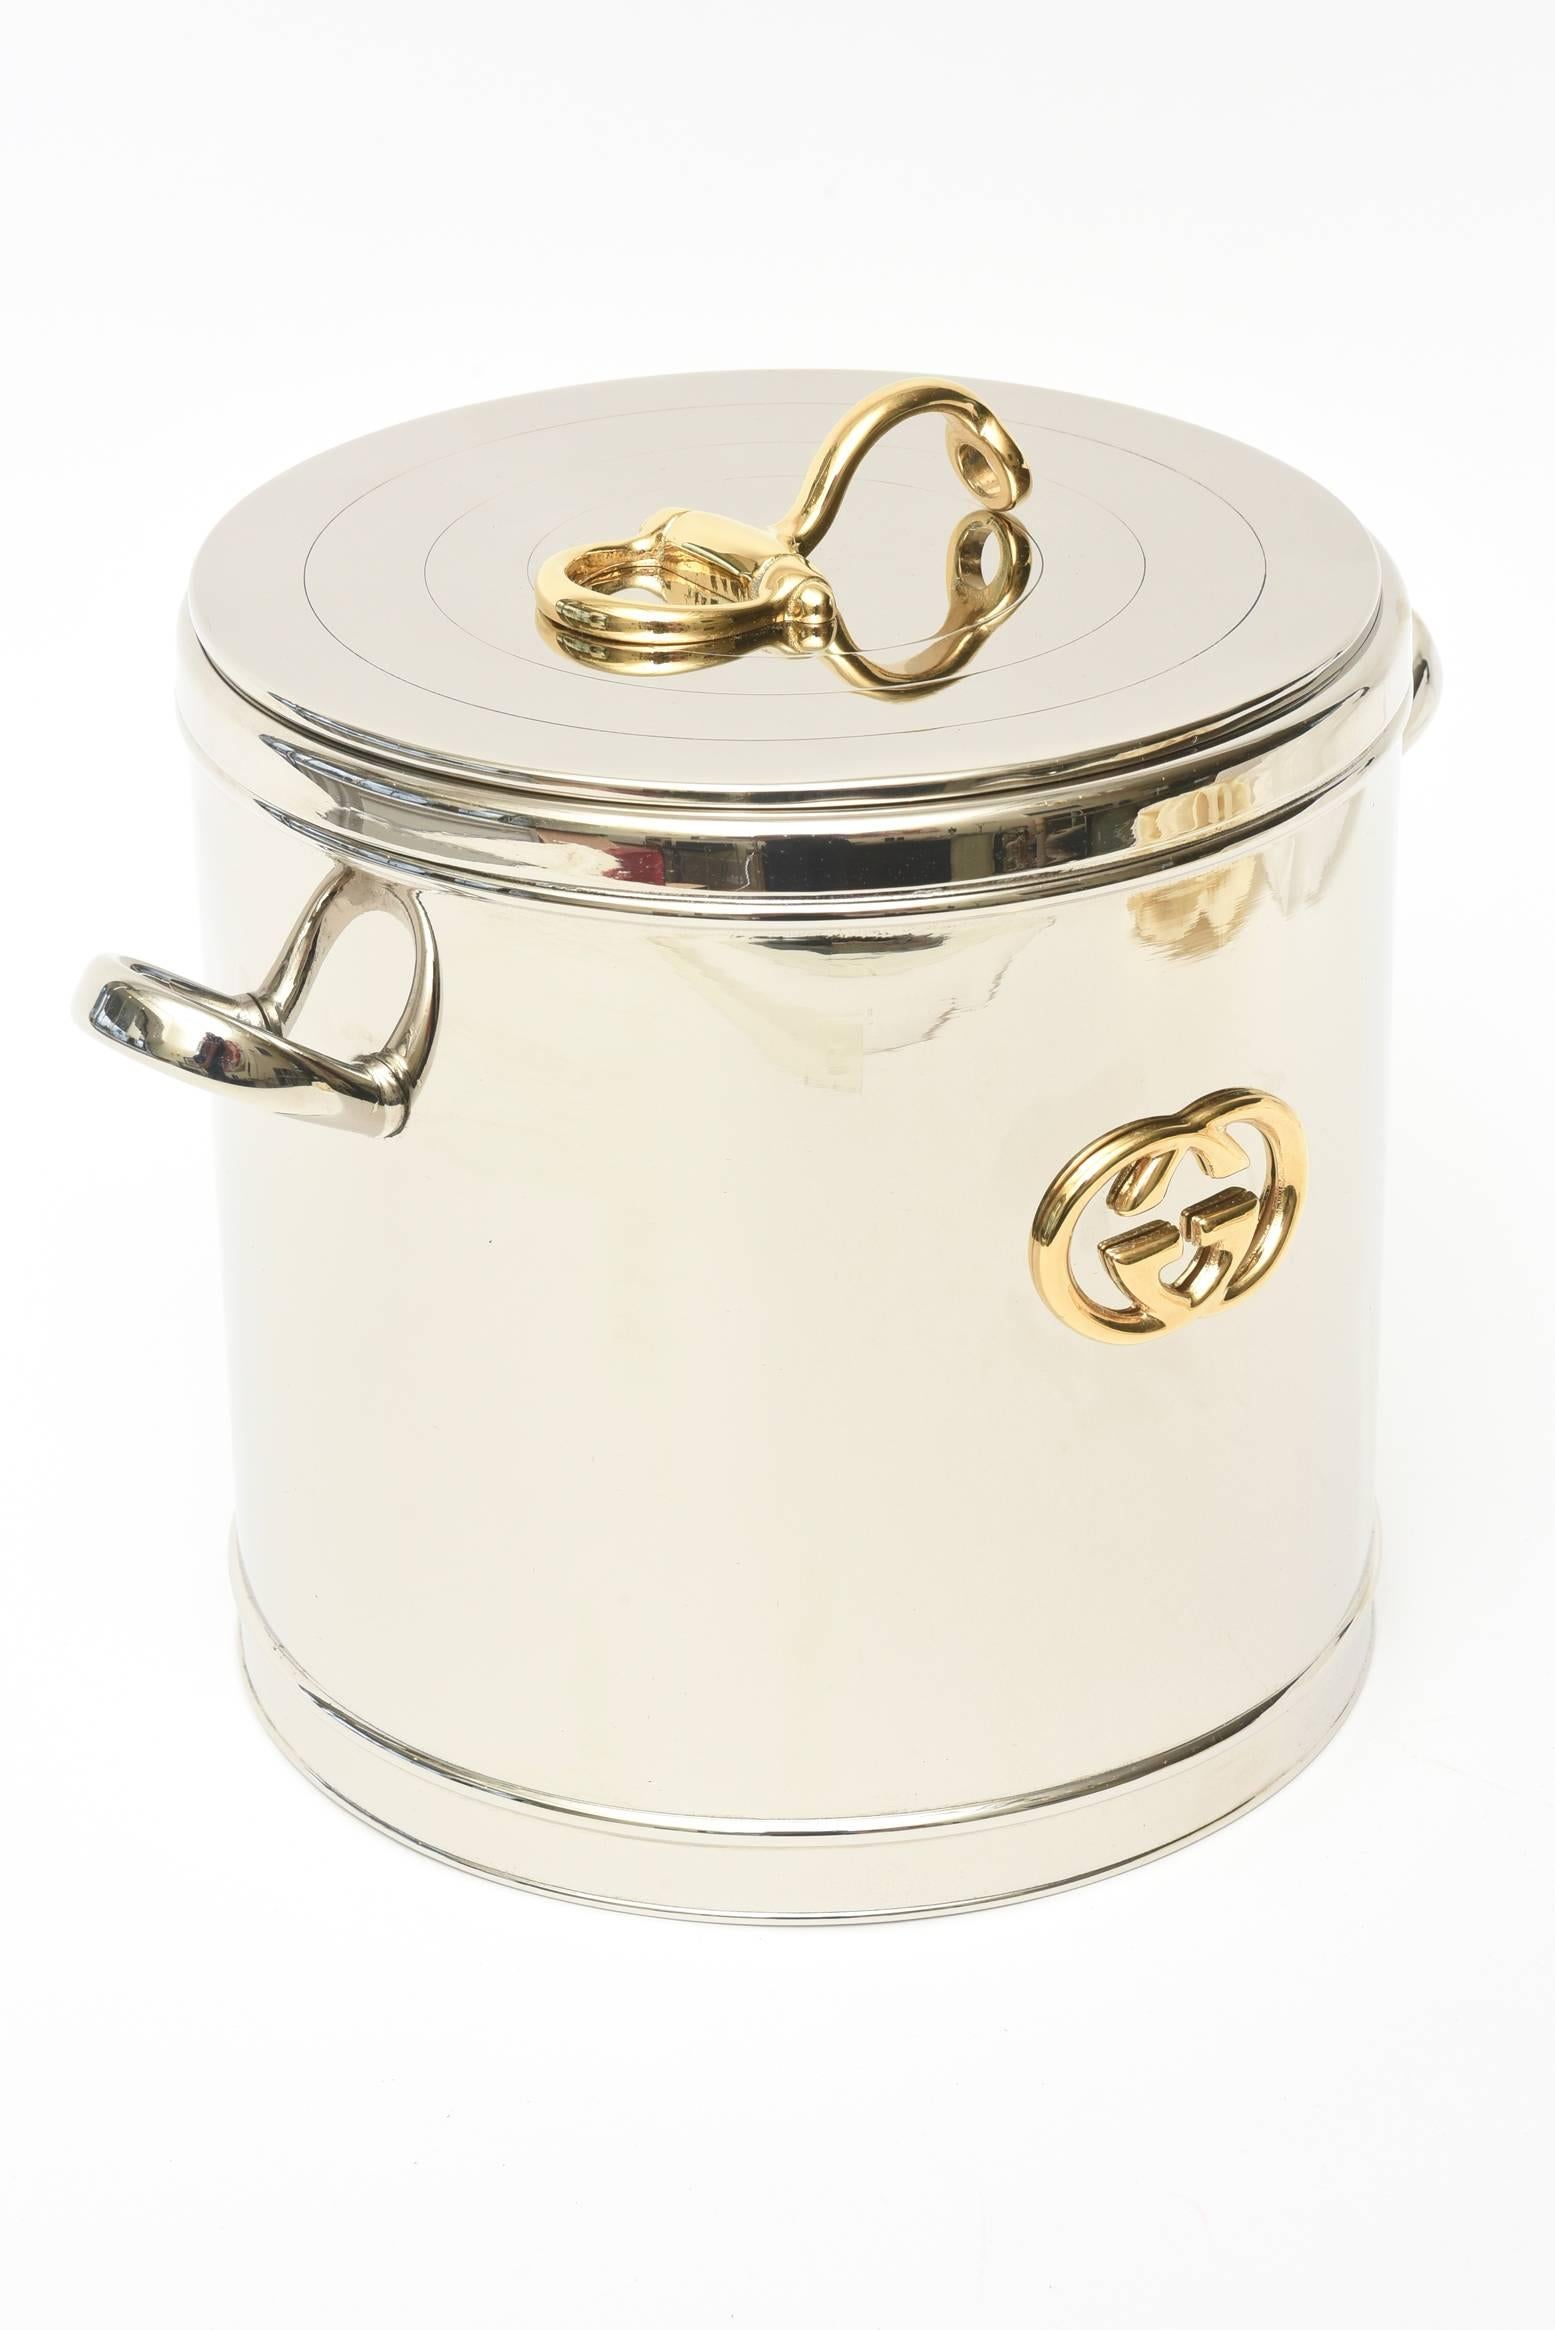 This gorgeous Italian vintage hallmarked Gucci horse bit ice bucket has been completely restored. It has been replpated with the original 22-karat gold plating on the designated areas and GG's. The other part has been re silver plated.
It has a